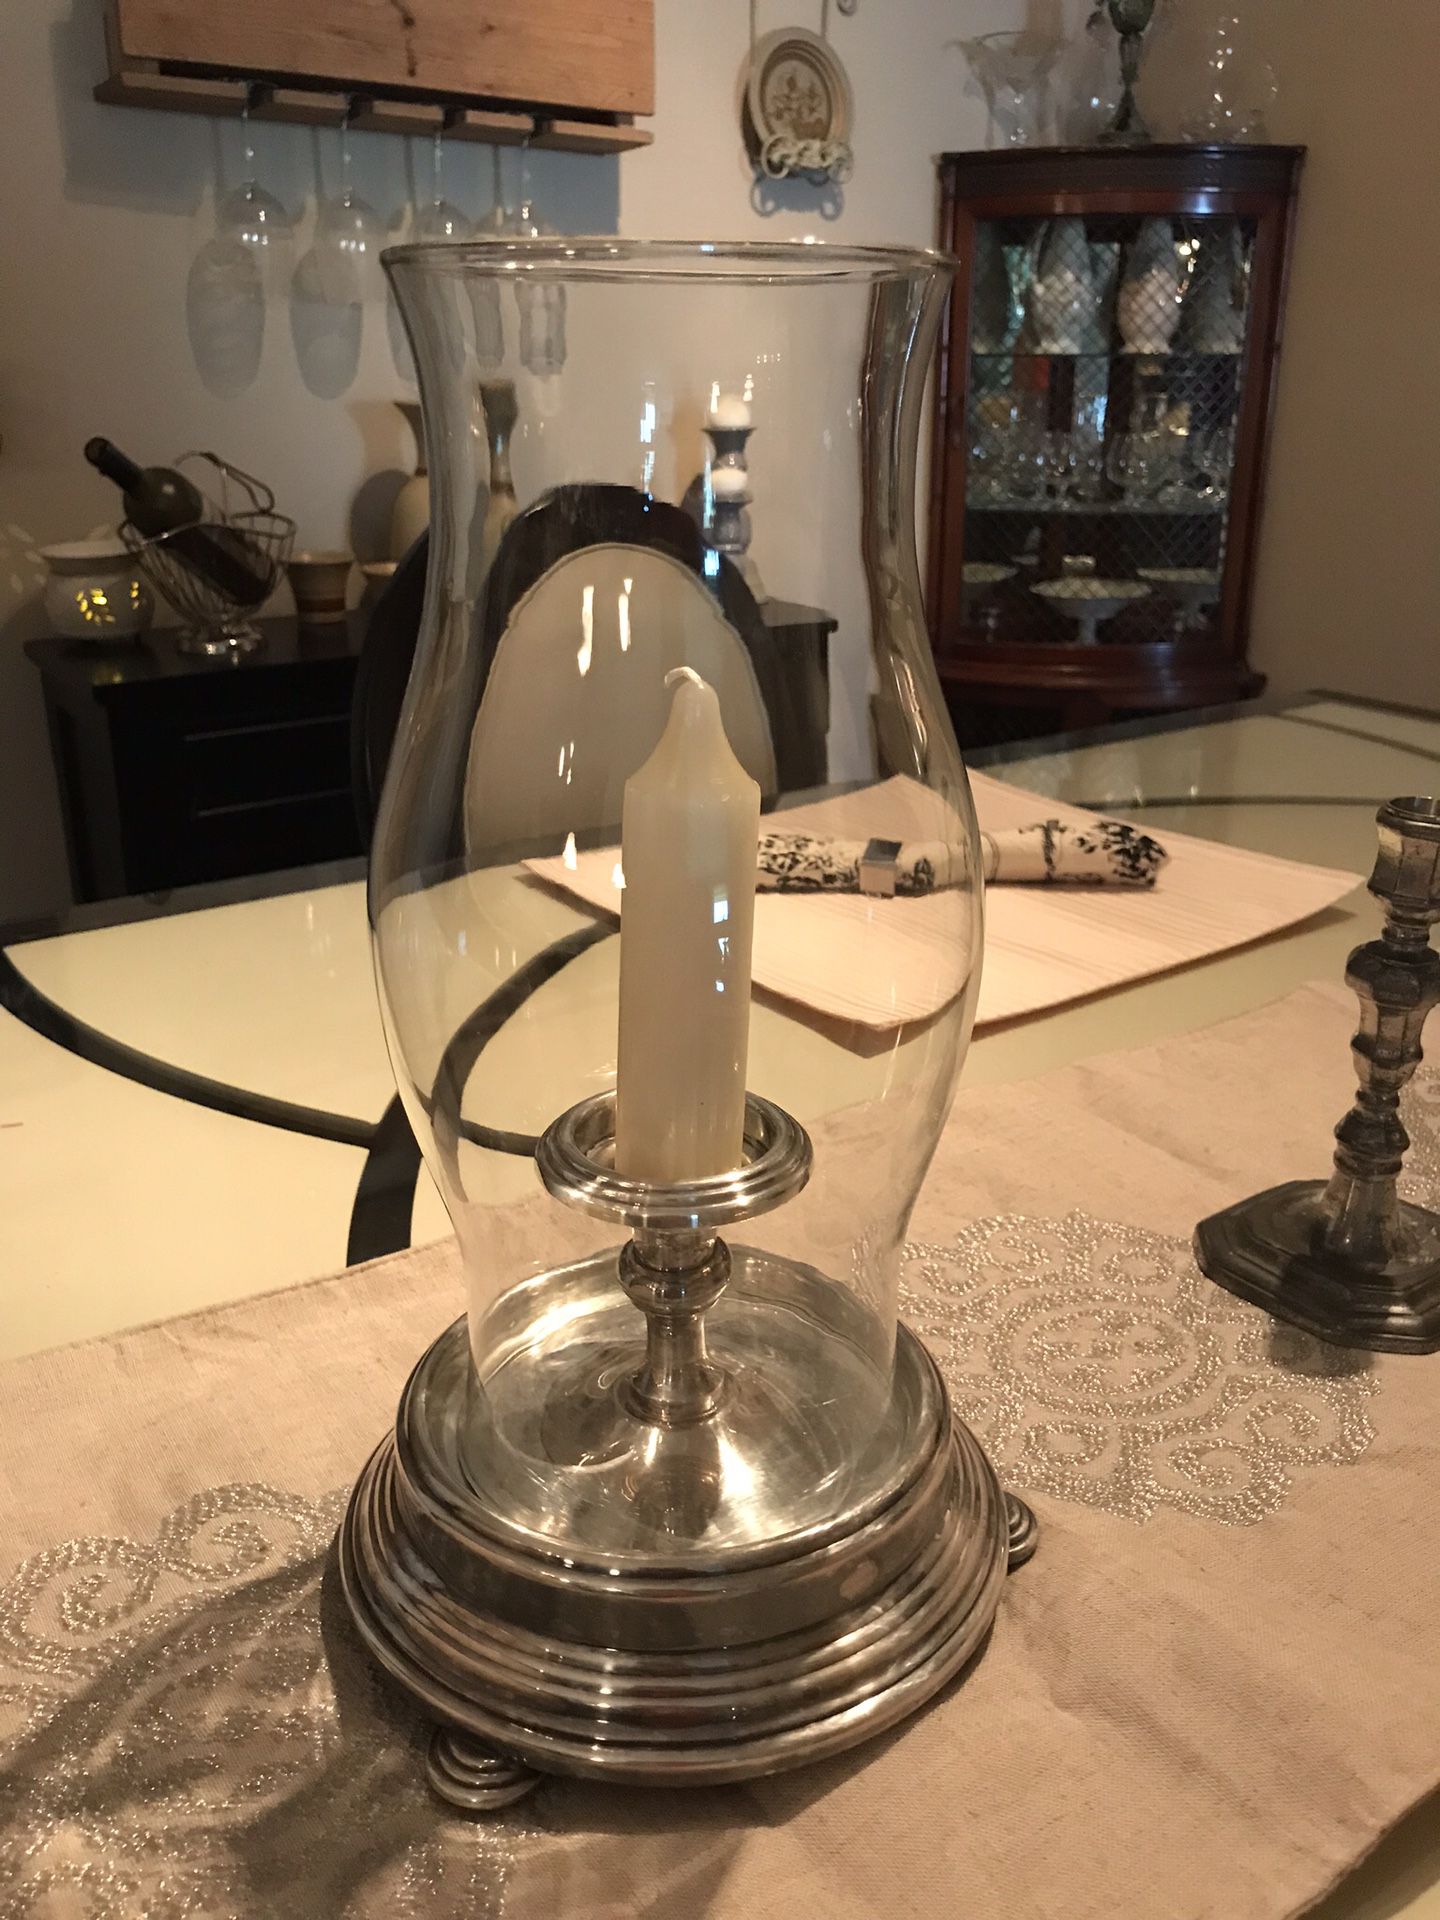 Vintage Candle Holder with Hurricane